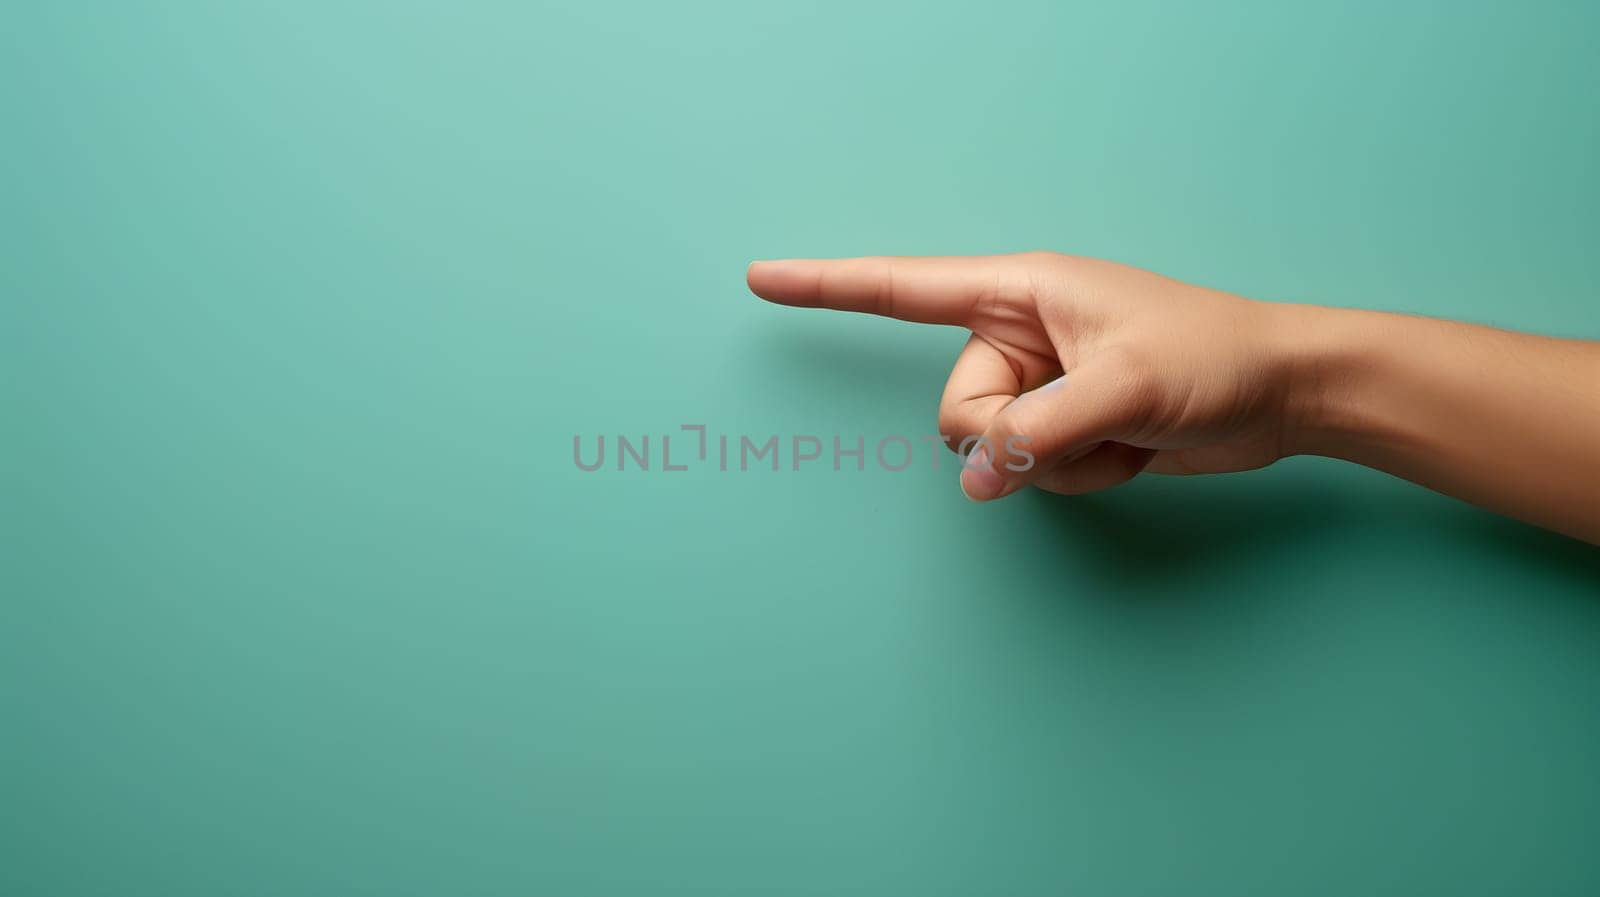 Hand Pointing to the Right Against Teal Background by chrisroll